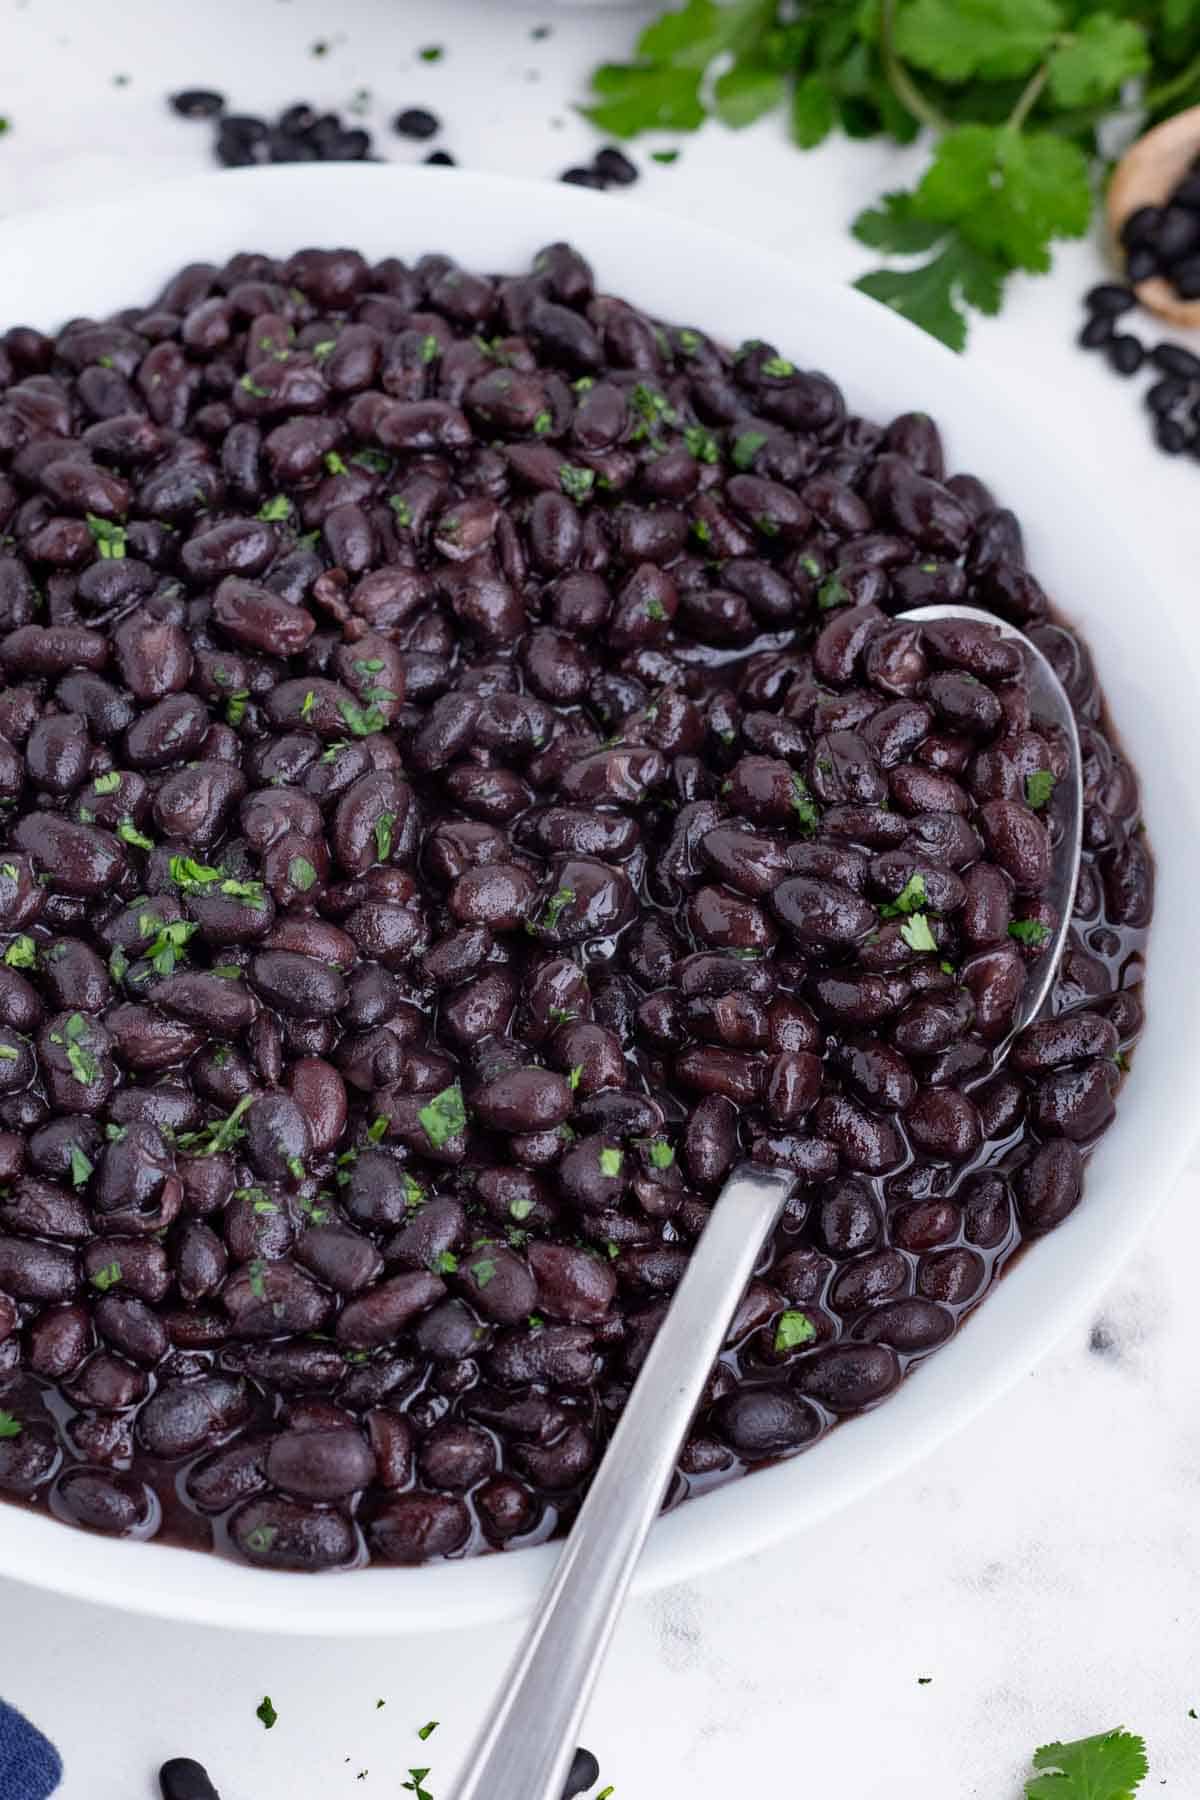 Instant Pot black beans cook in half the time.